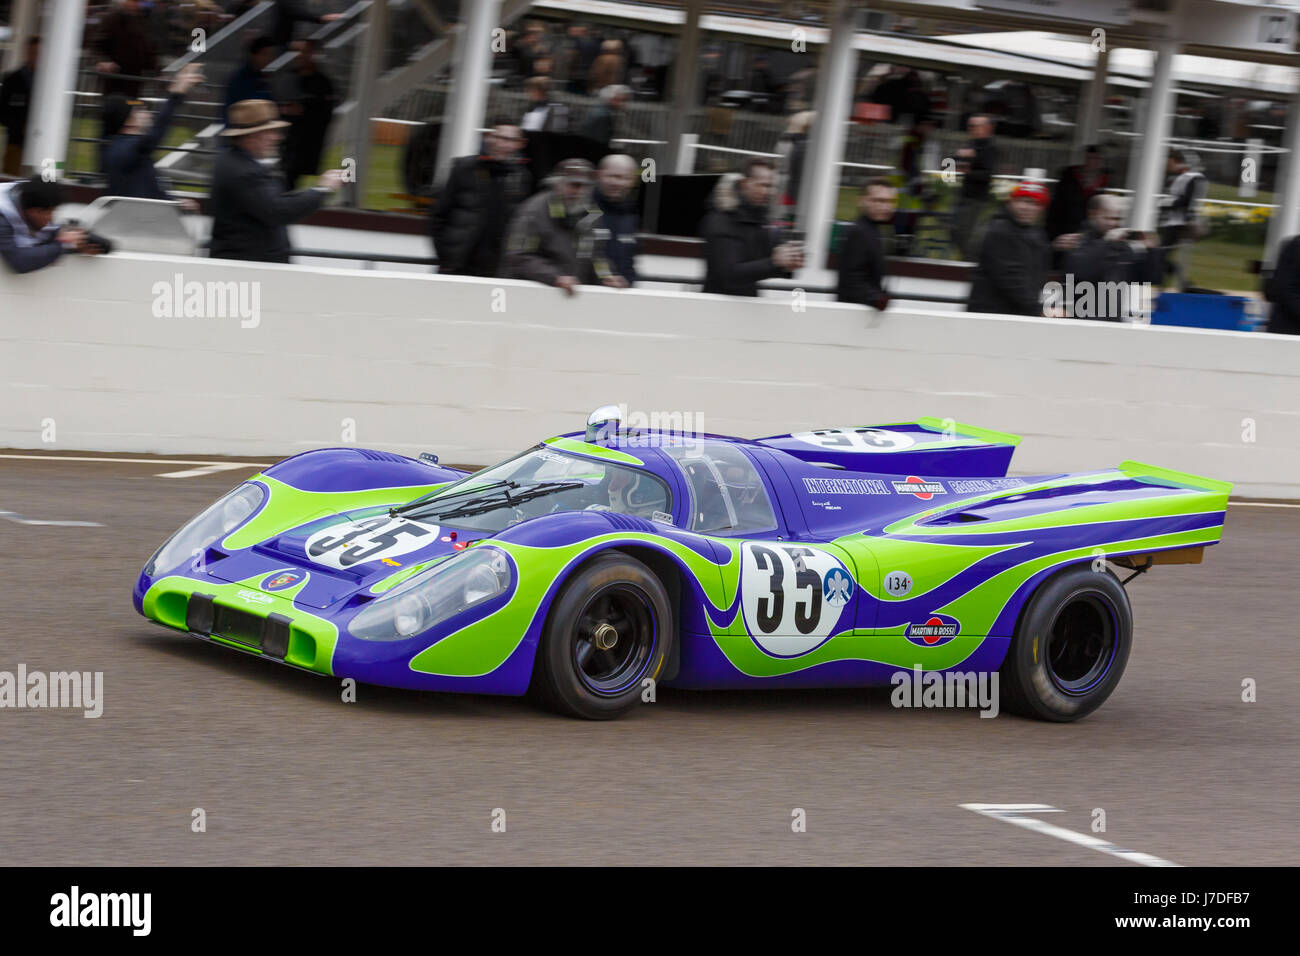 1971 Porsche 917LH Group 5 car with driver Gary Pearson at the Goodwood GRRC 74th Members Meeting, Sussex, UK. Stock Photo